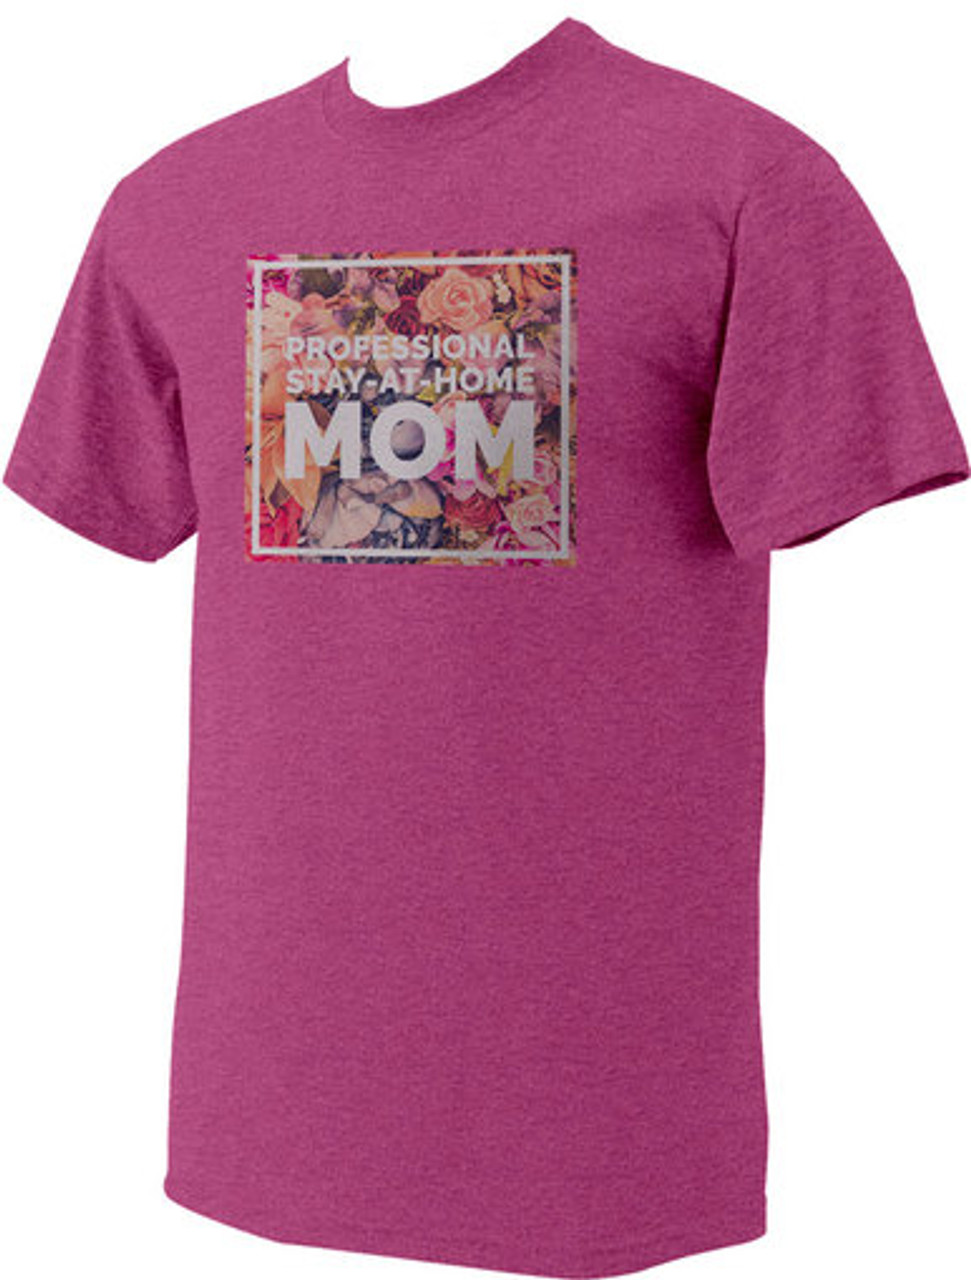 Stay-At-Home Mom T-Shirt